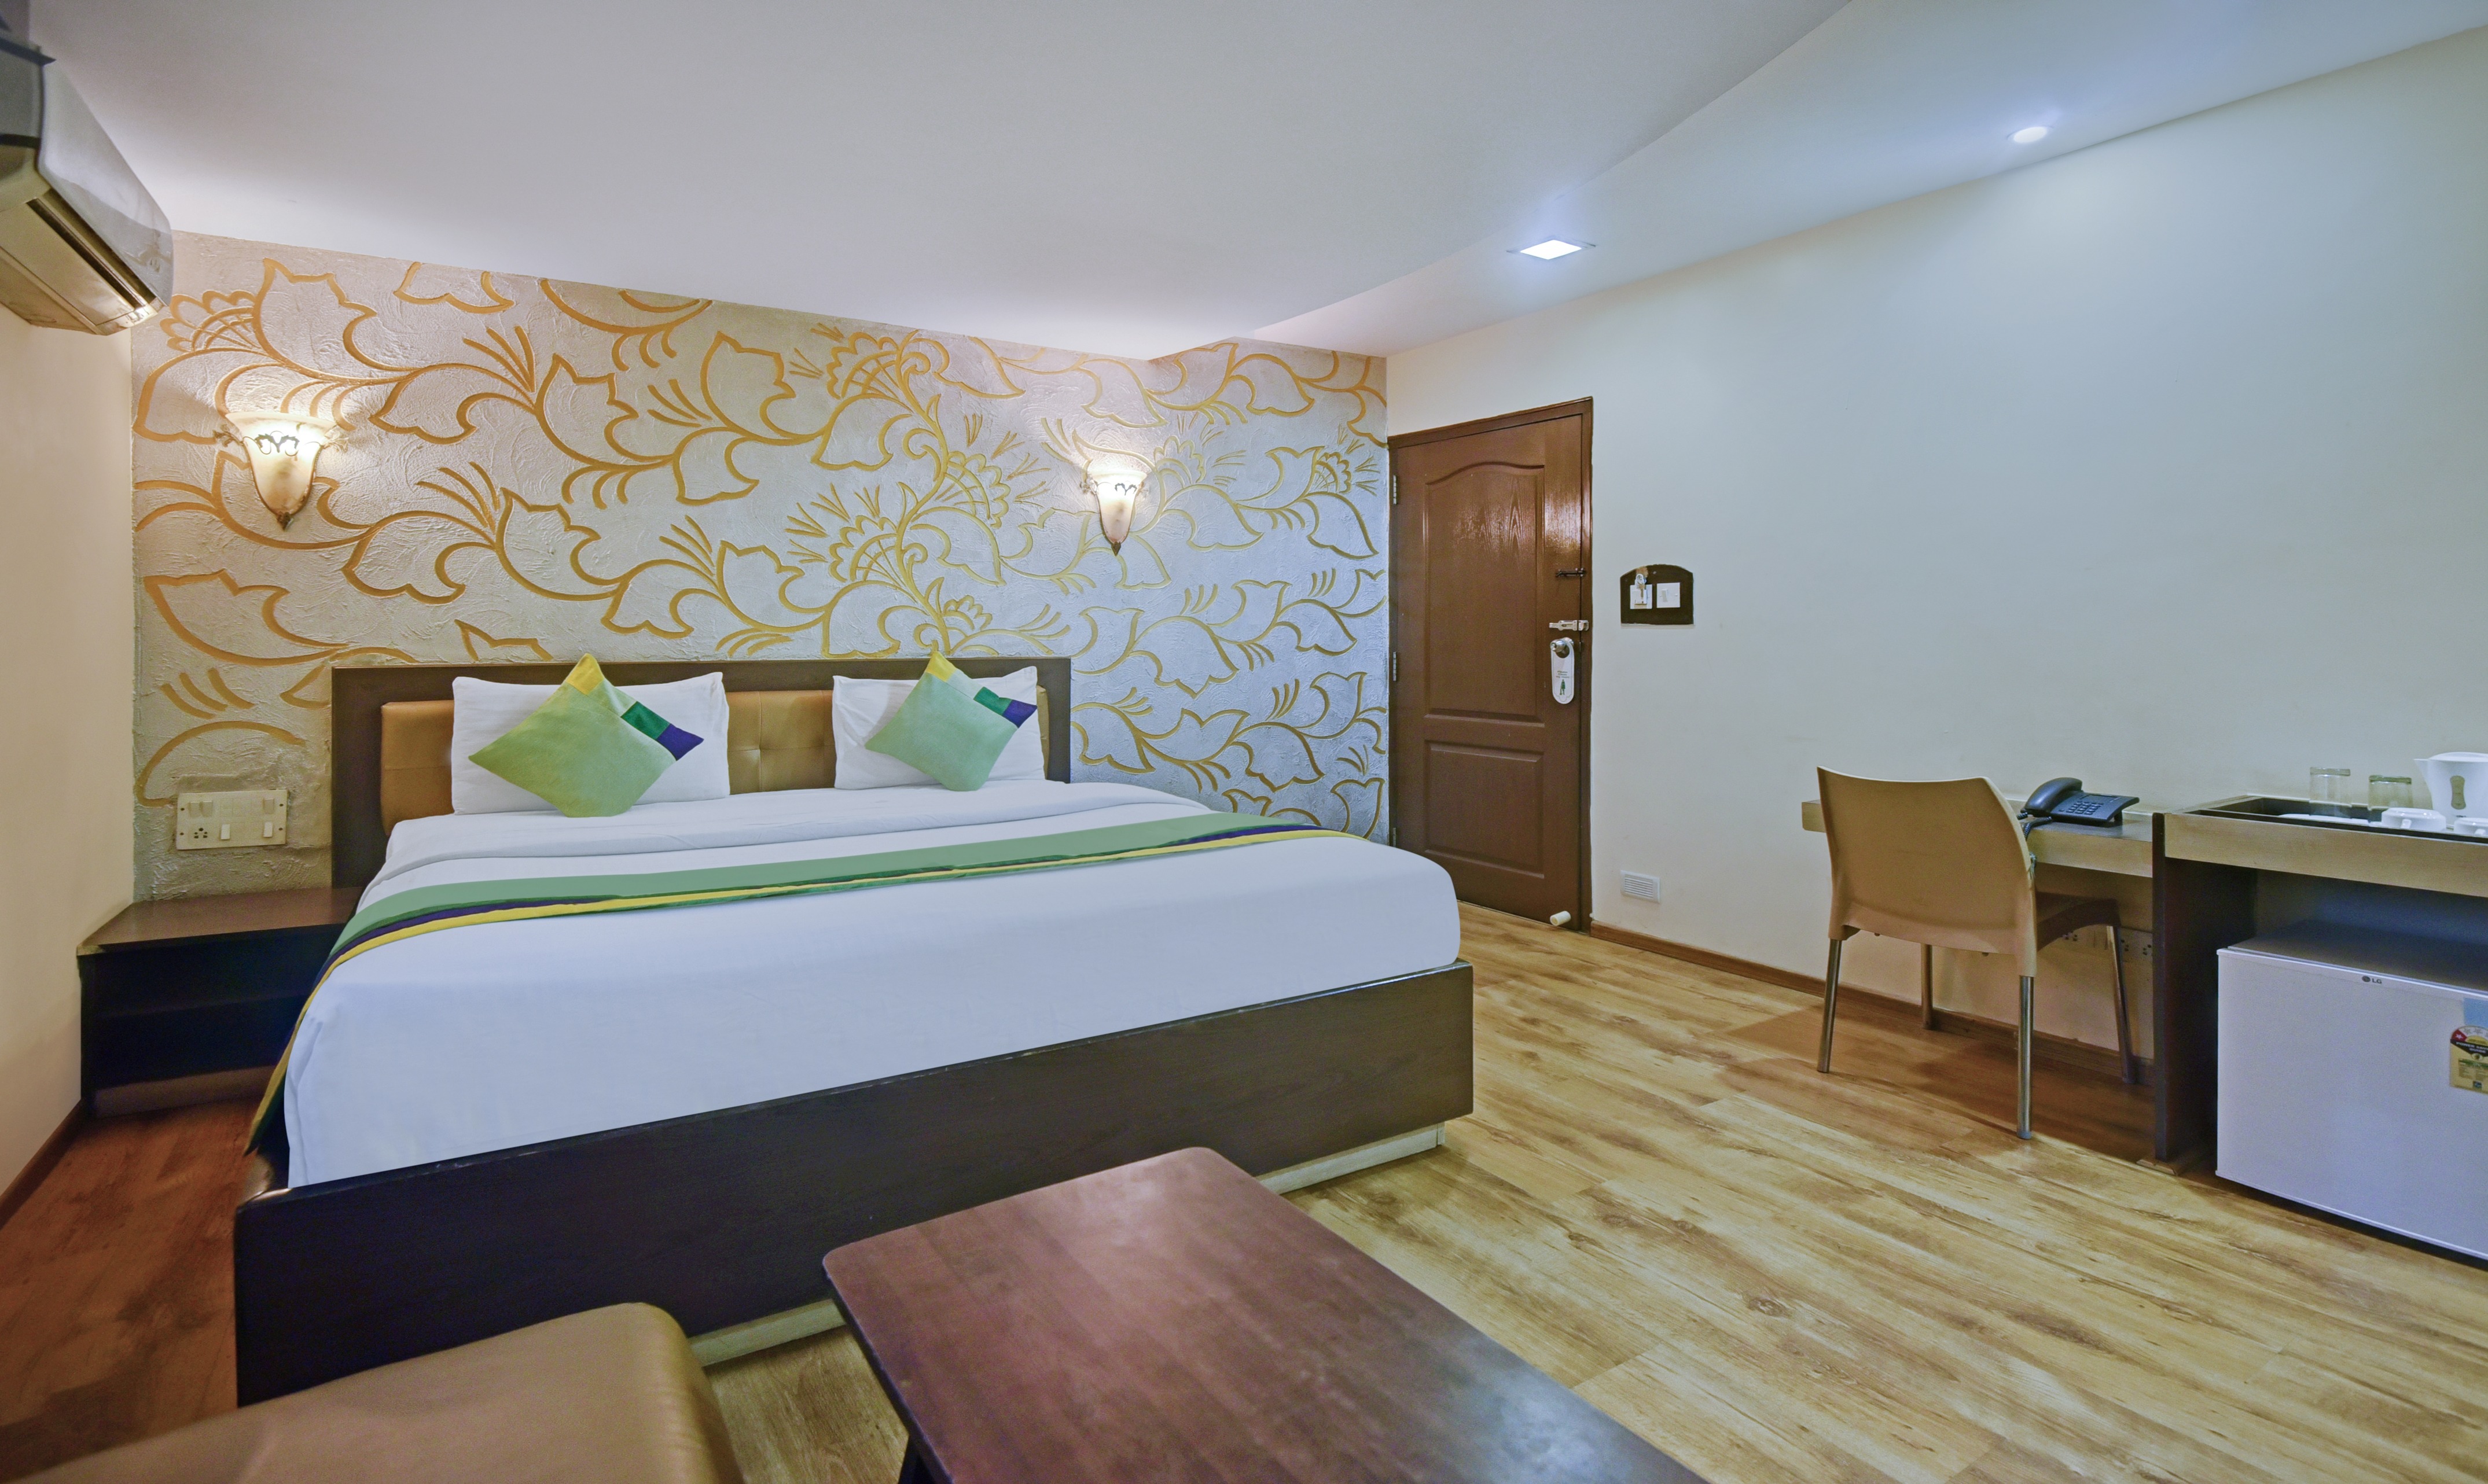 3 Star Hotels in Jayanagar 3rd Block, Bangalore, Bangalore - Get Upto 70%  OFF on Price - Lowest Rates